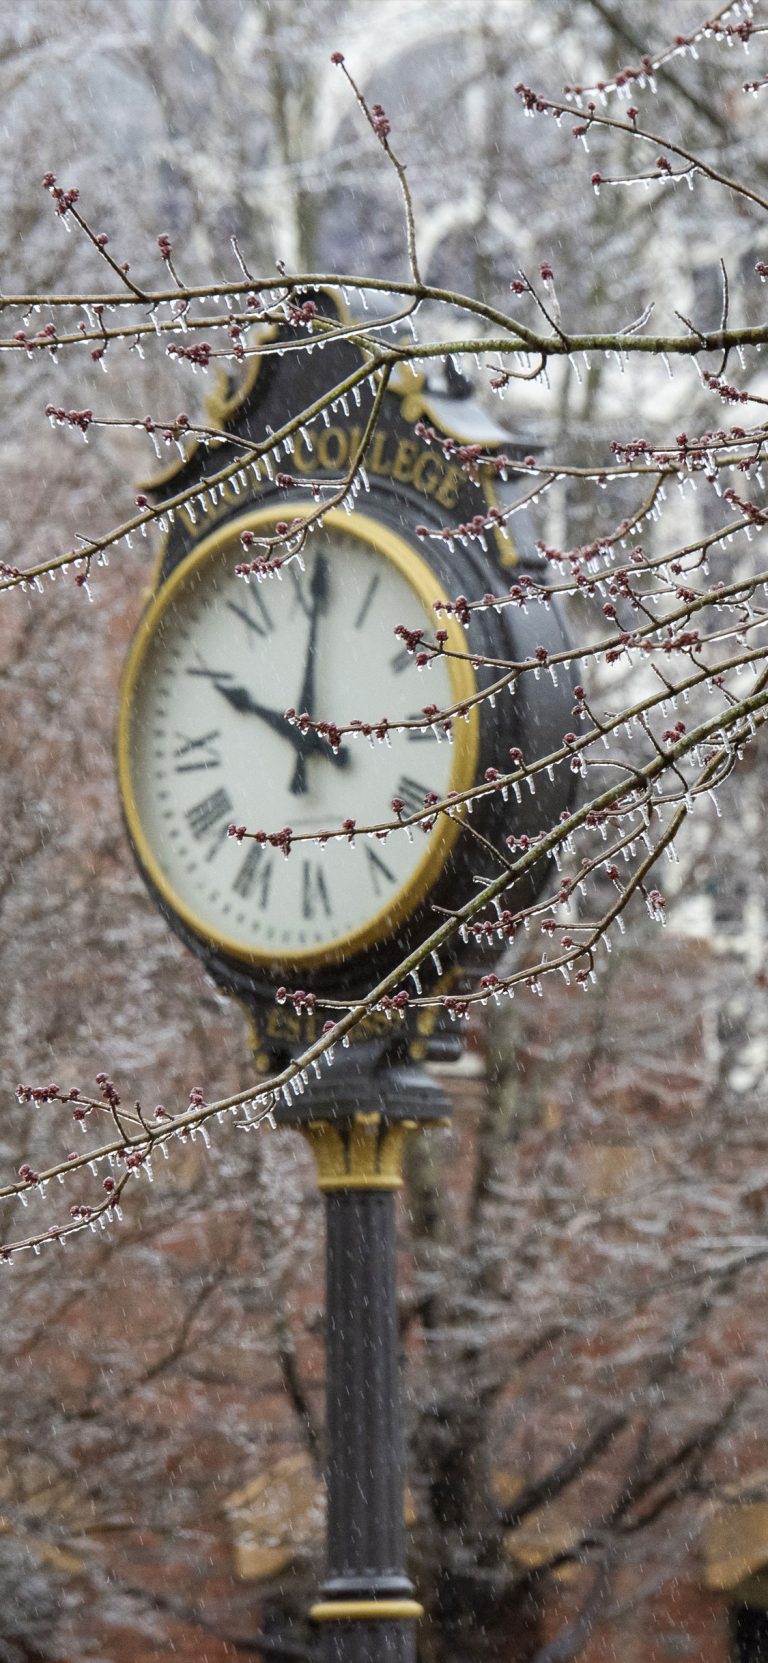 Ice-covered tree branches with a large clock in the background.